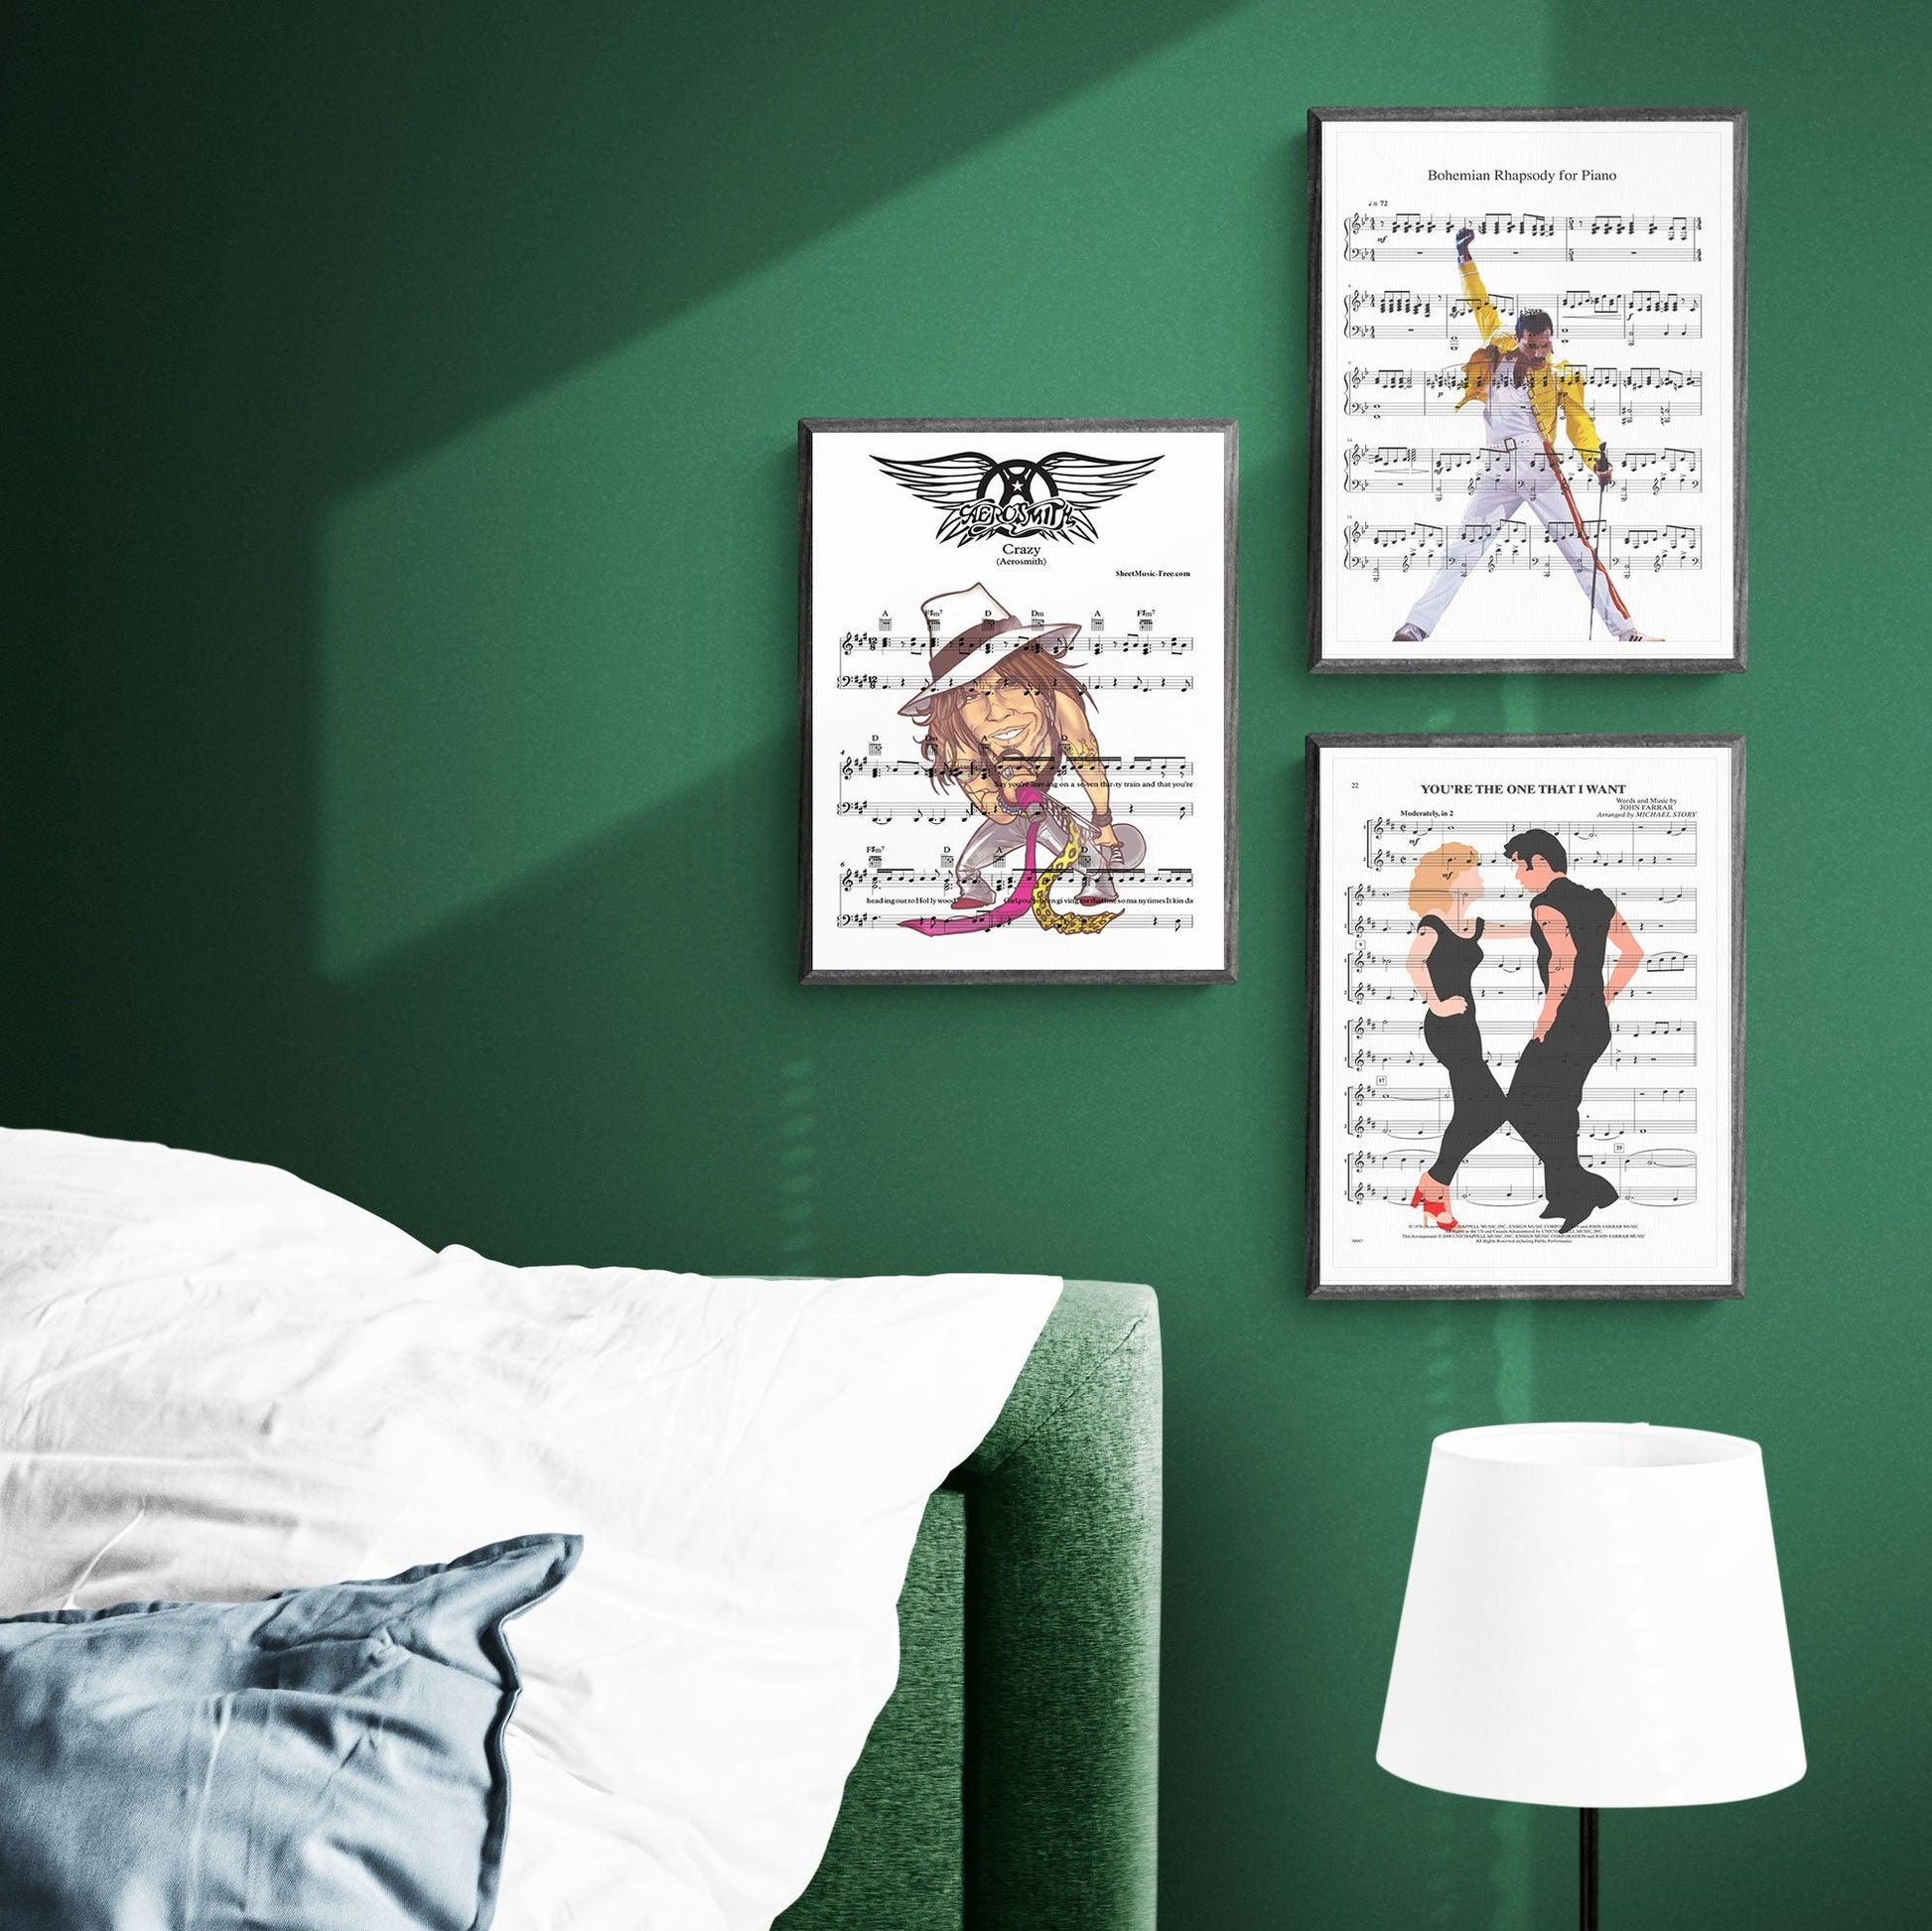 Aerosmith - I Don't Want to Miss a Thing Print | Song Music Sheet Notes Print Everyone has a favorite song especially Aerosmith, and now you can show the score as printed staff. The personal favorite song sheet print shows the song chosen as the score